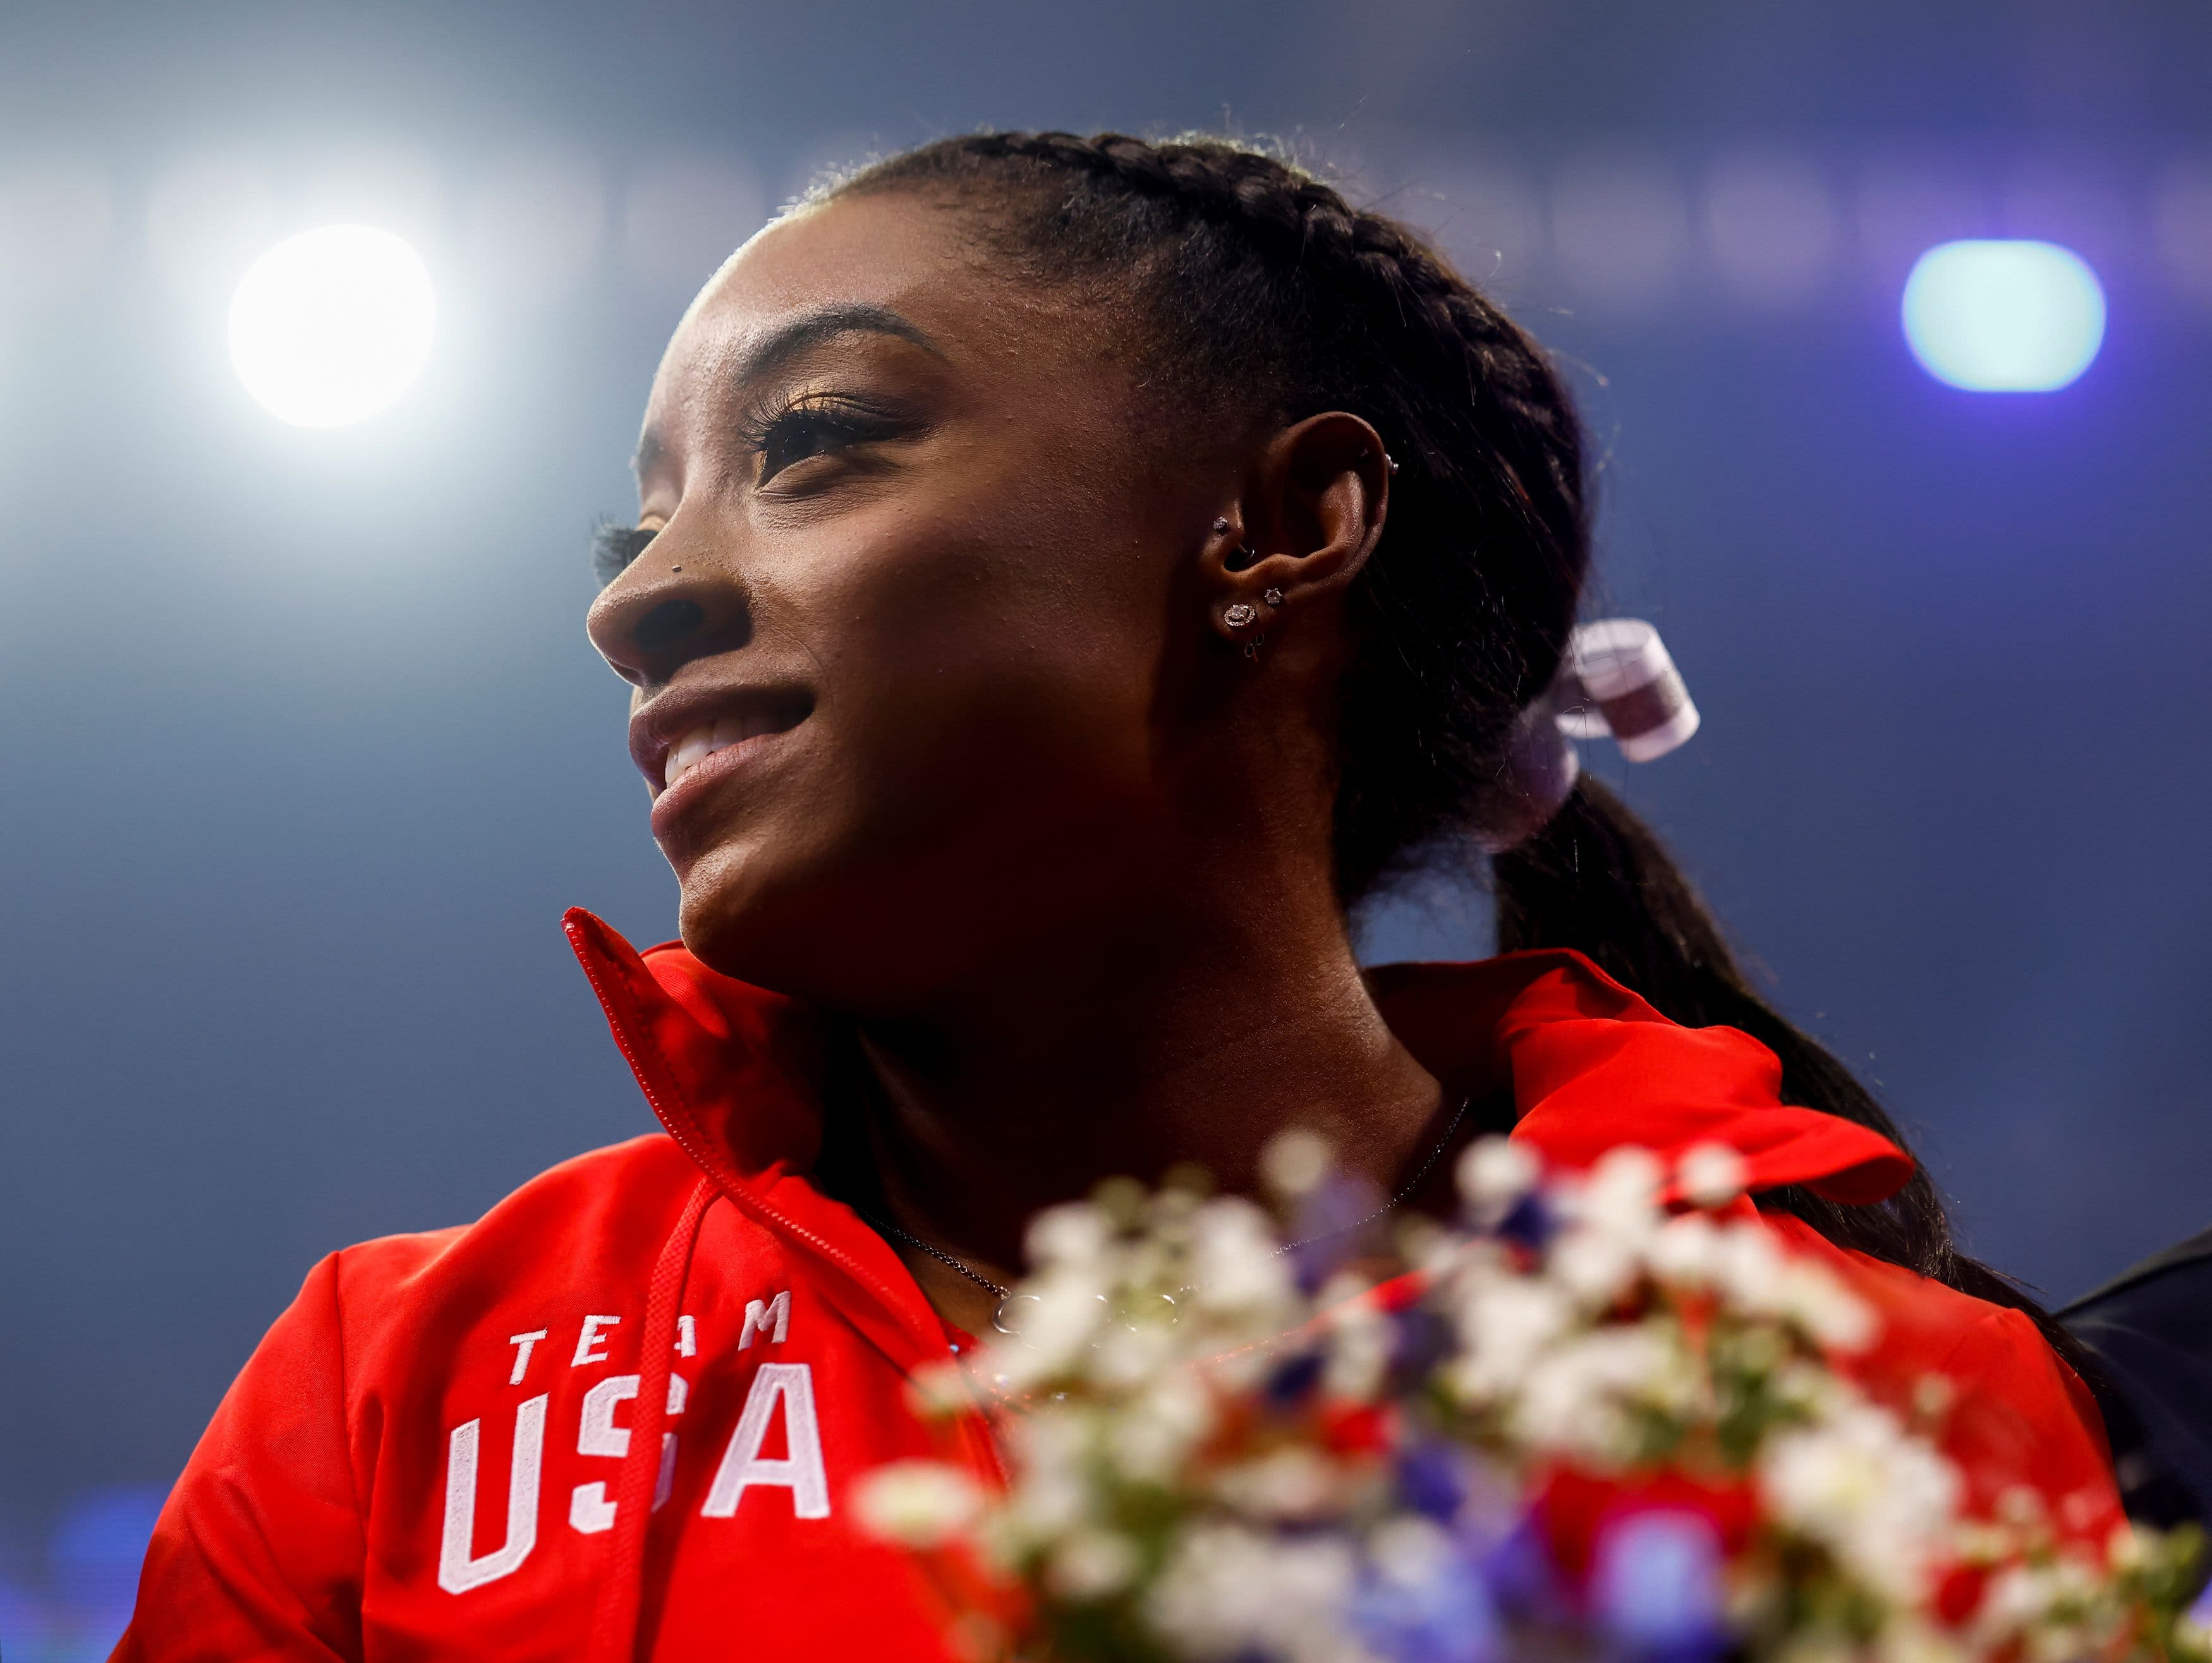 ‘You better be in the right headspace or really bad things are going to happen': Shannon Miller on Simone Biles's exit